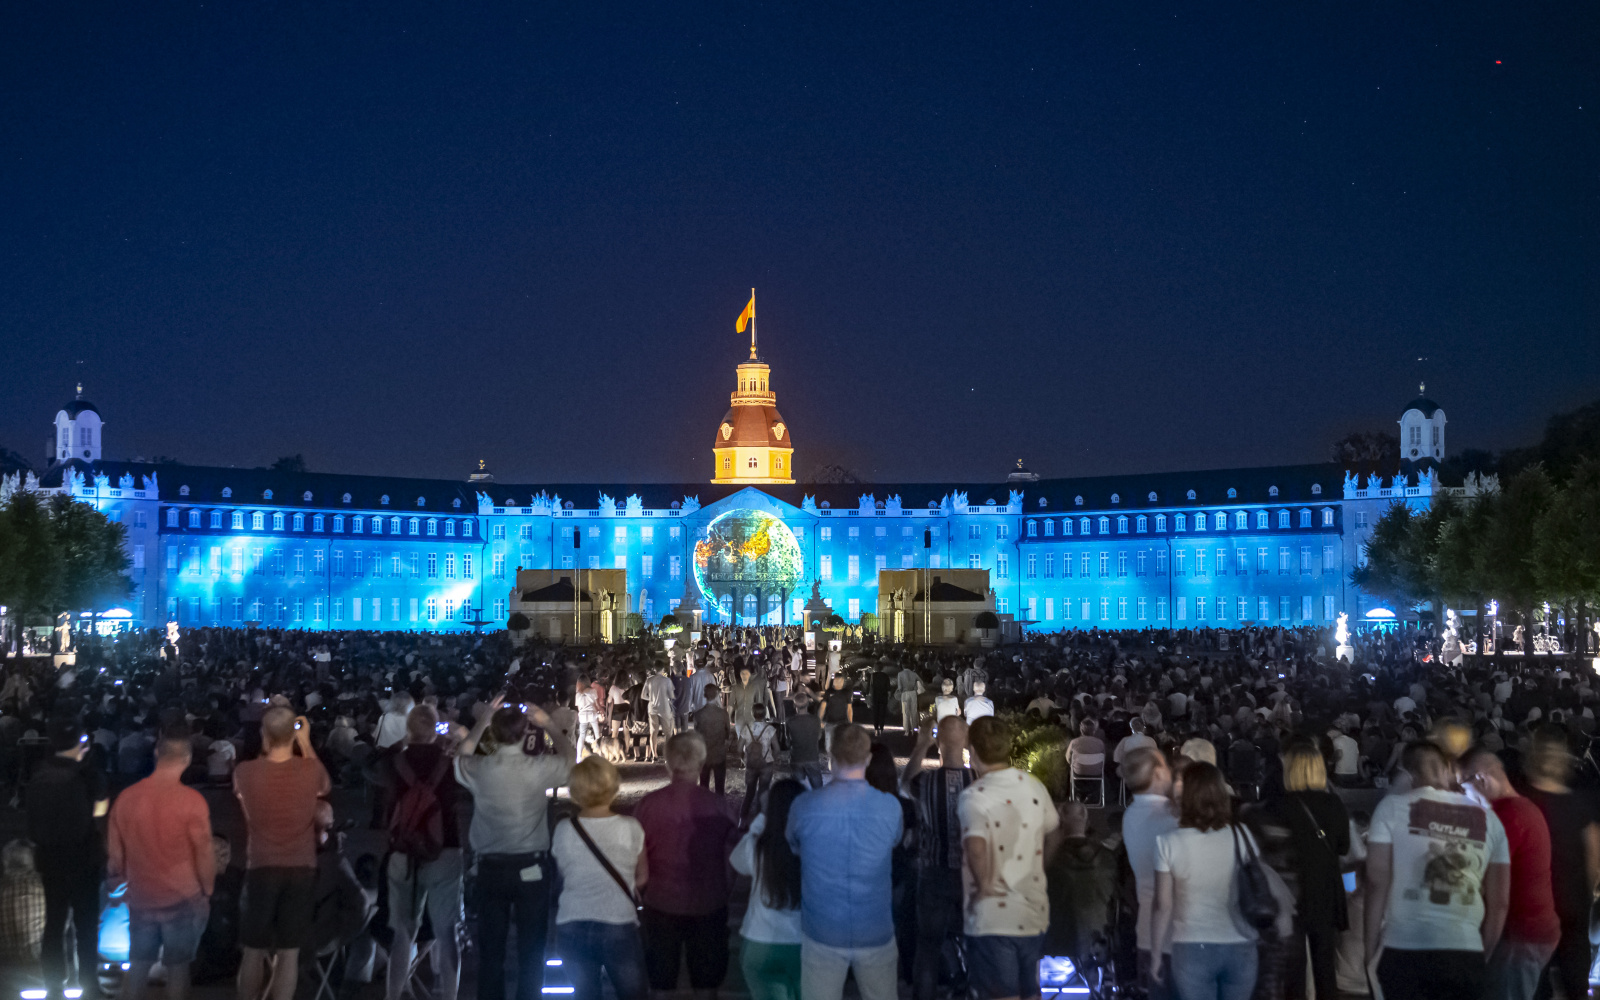 At the centre of the palace facade below the palace tower, the world globe lights up in a blue sea.